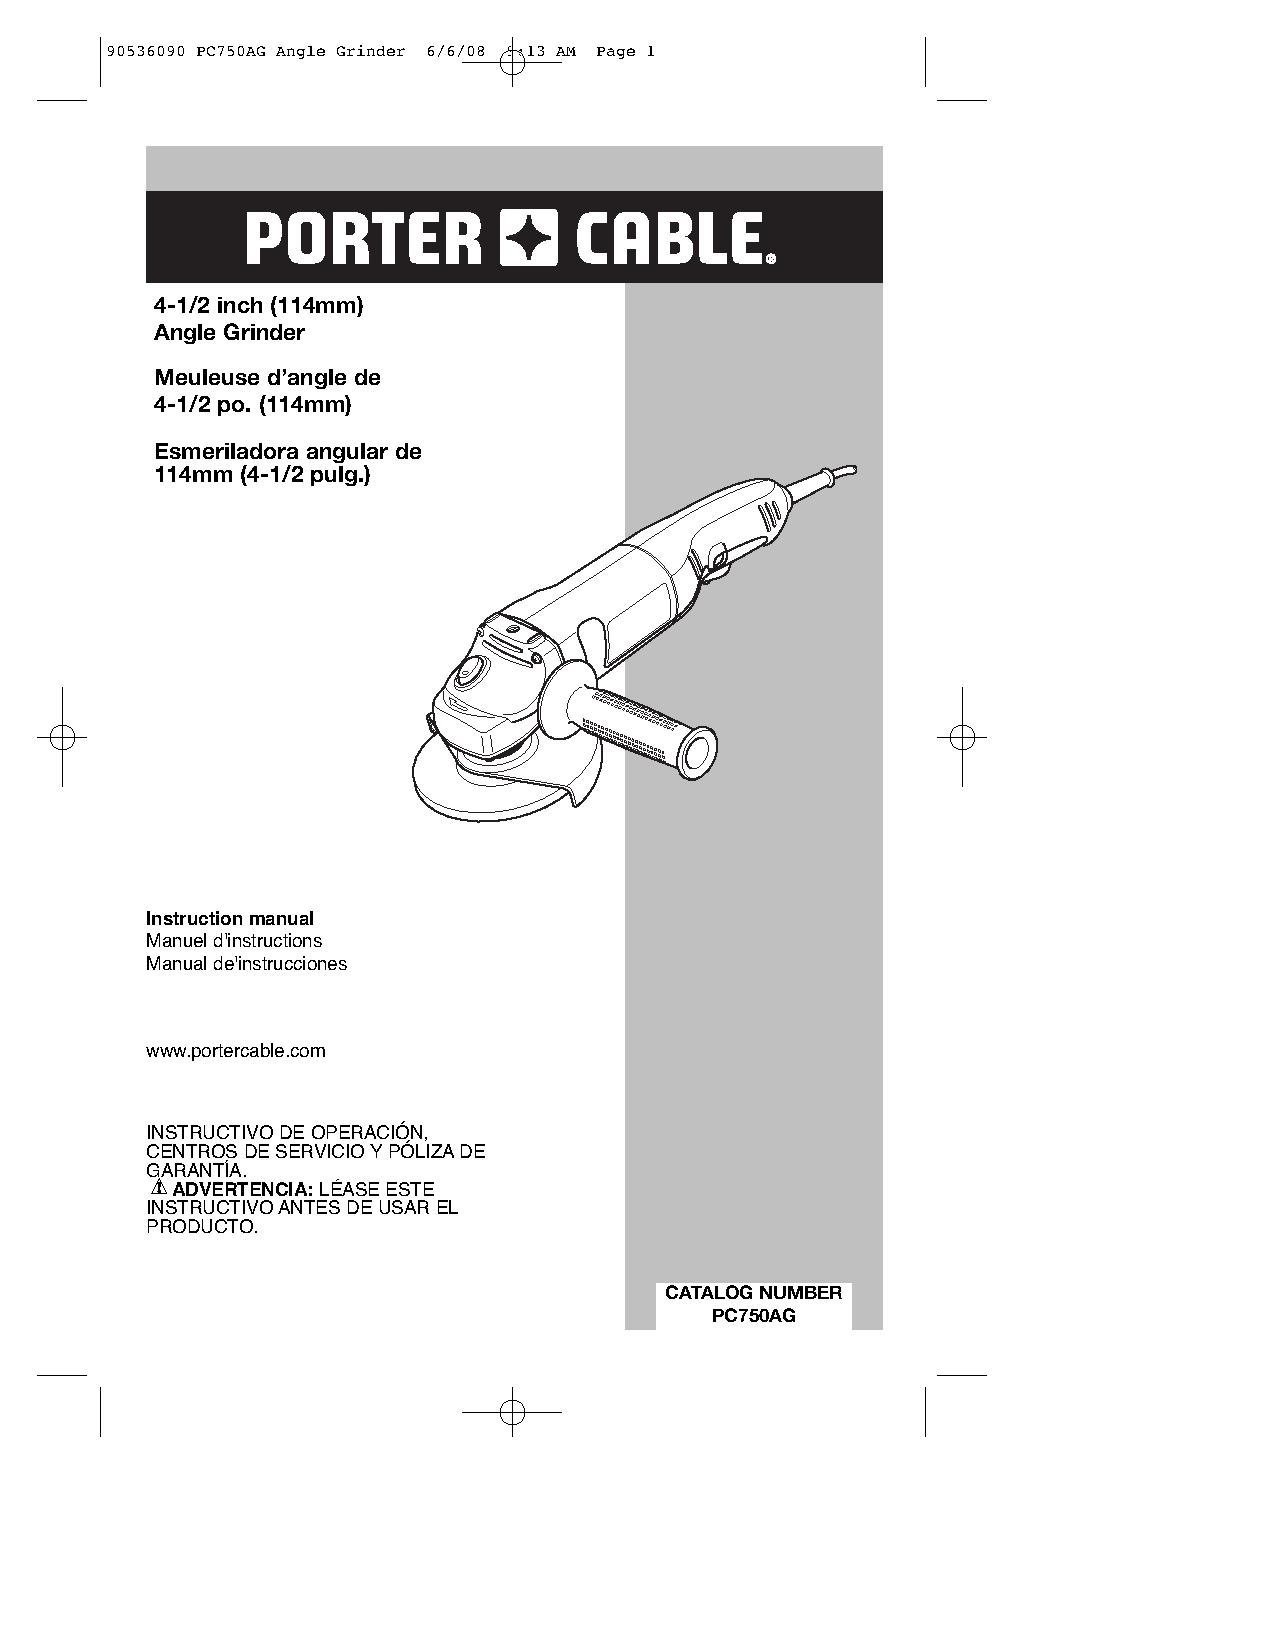 Porter Cable PC750AG 4.5 inch angle grinder.pdf